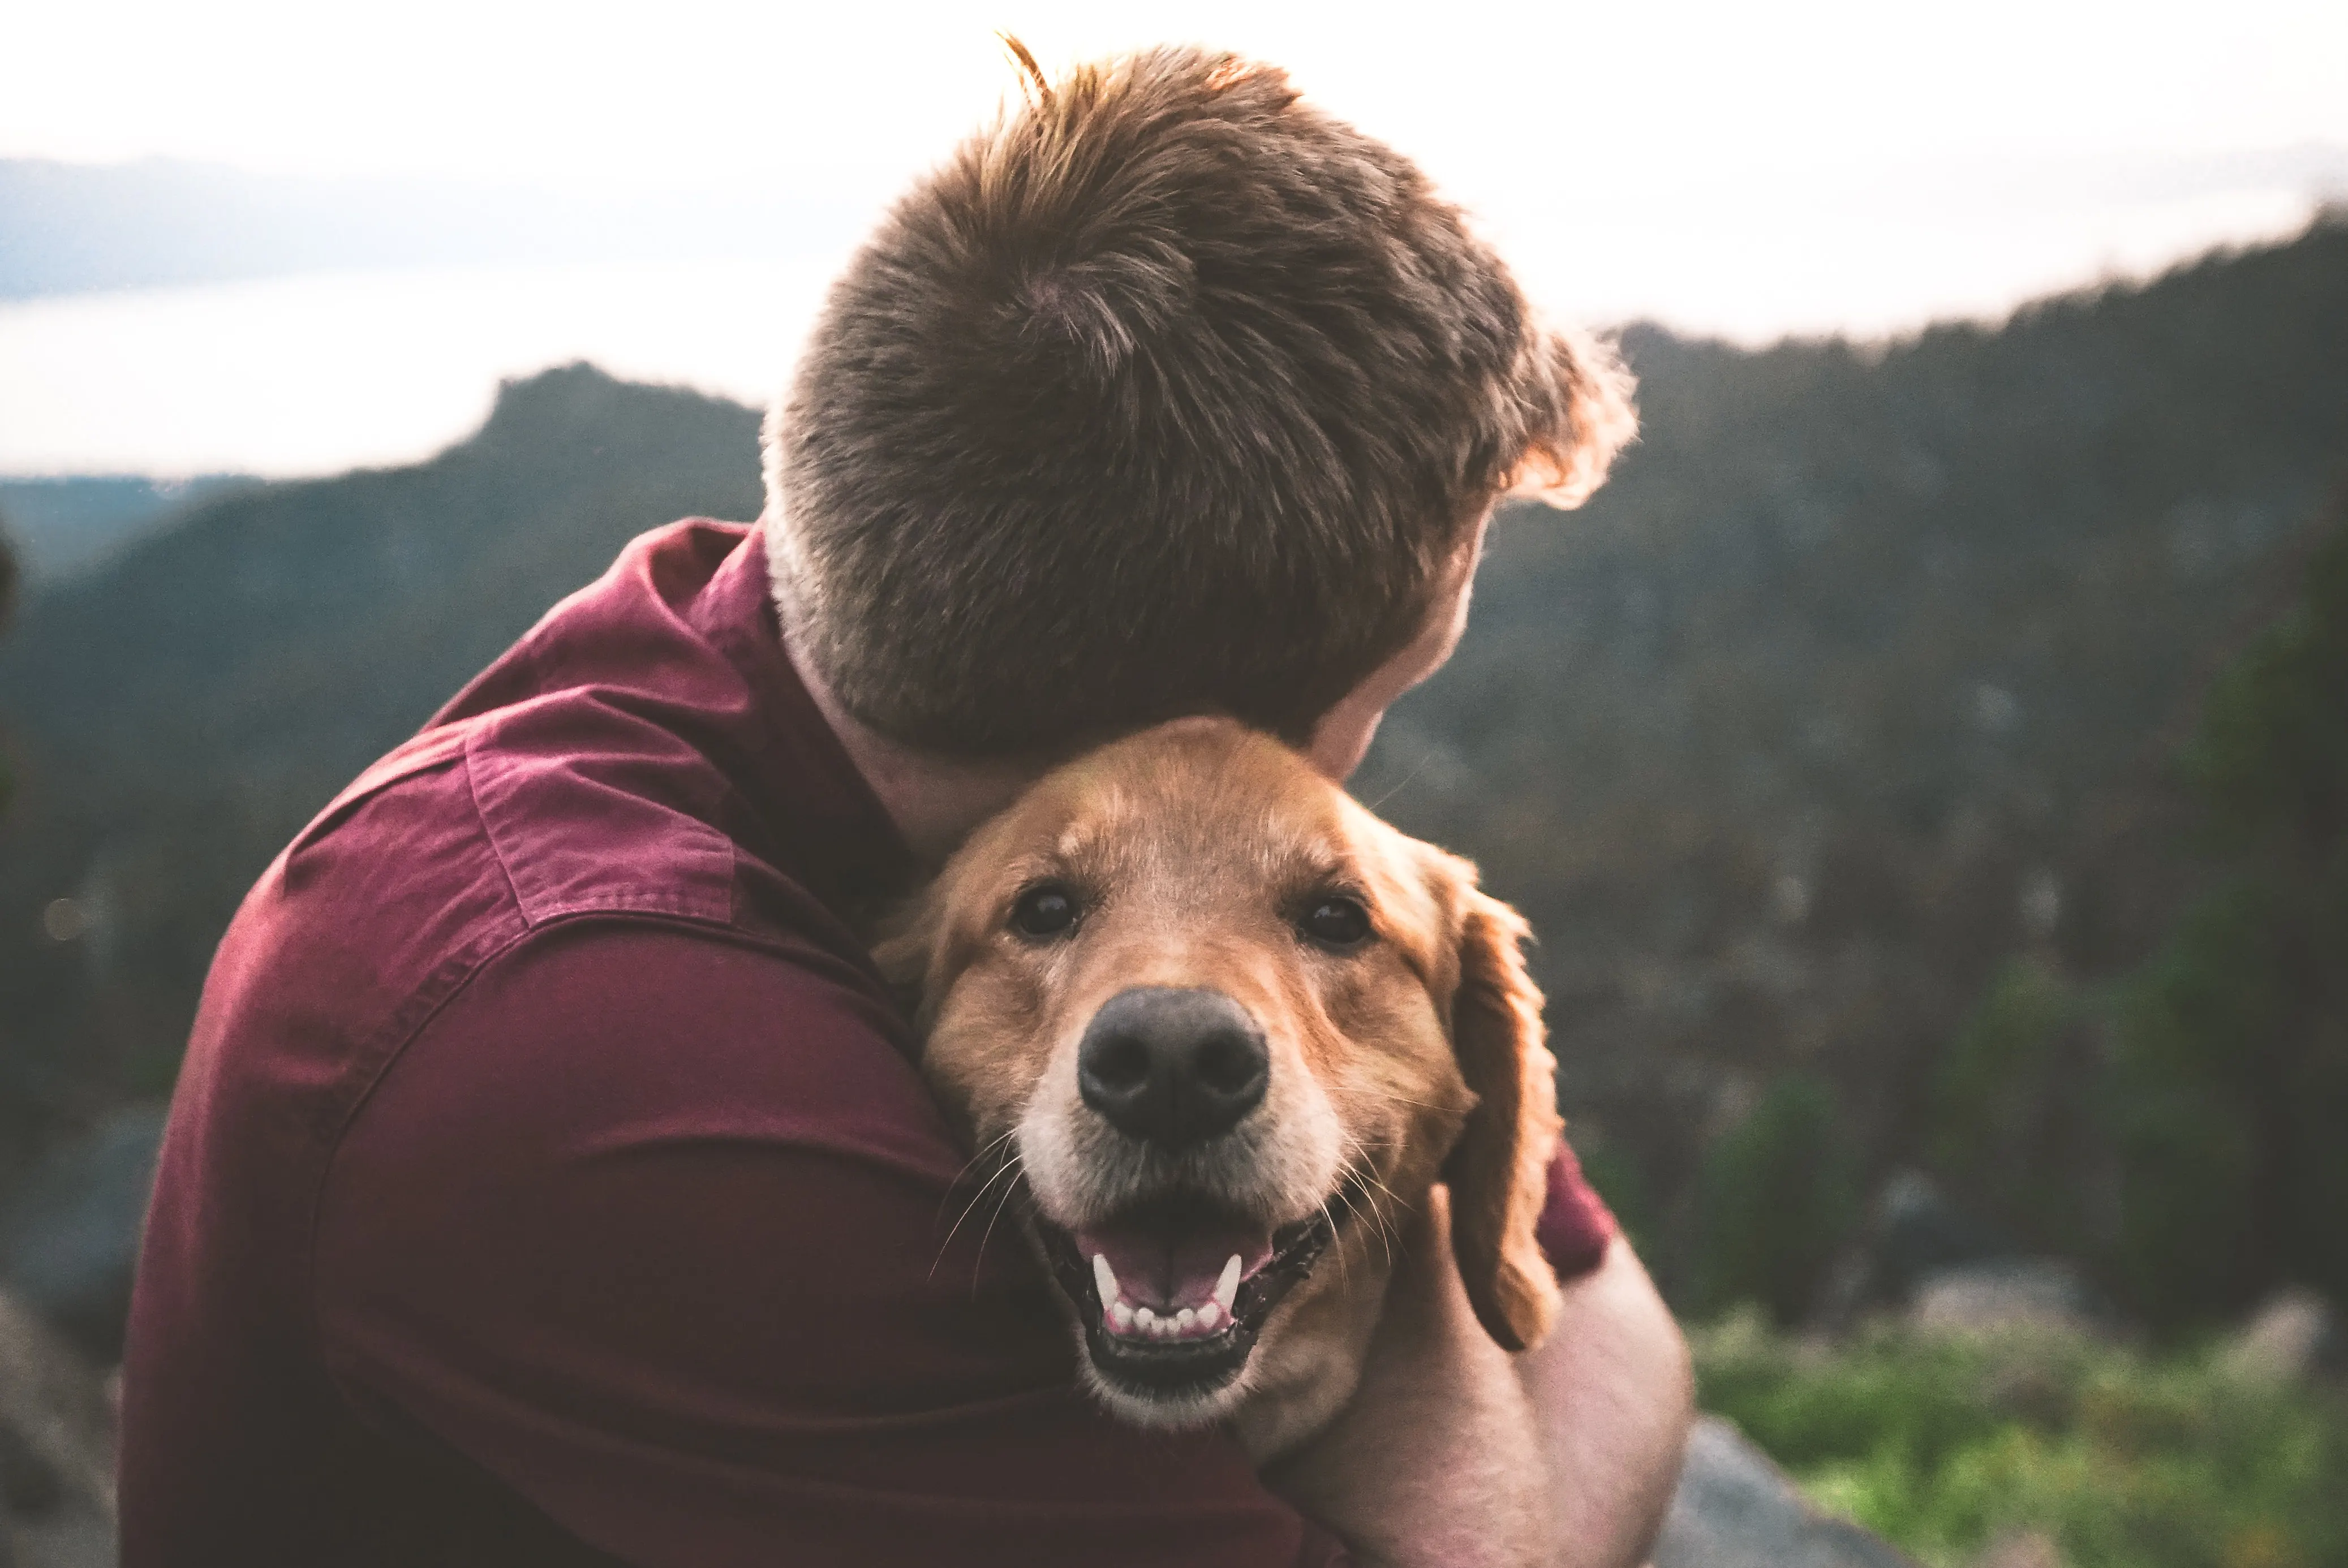 Fathers Day Dad Hugging Dog From Eric Ward on Unsplash